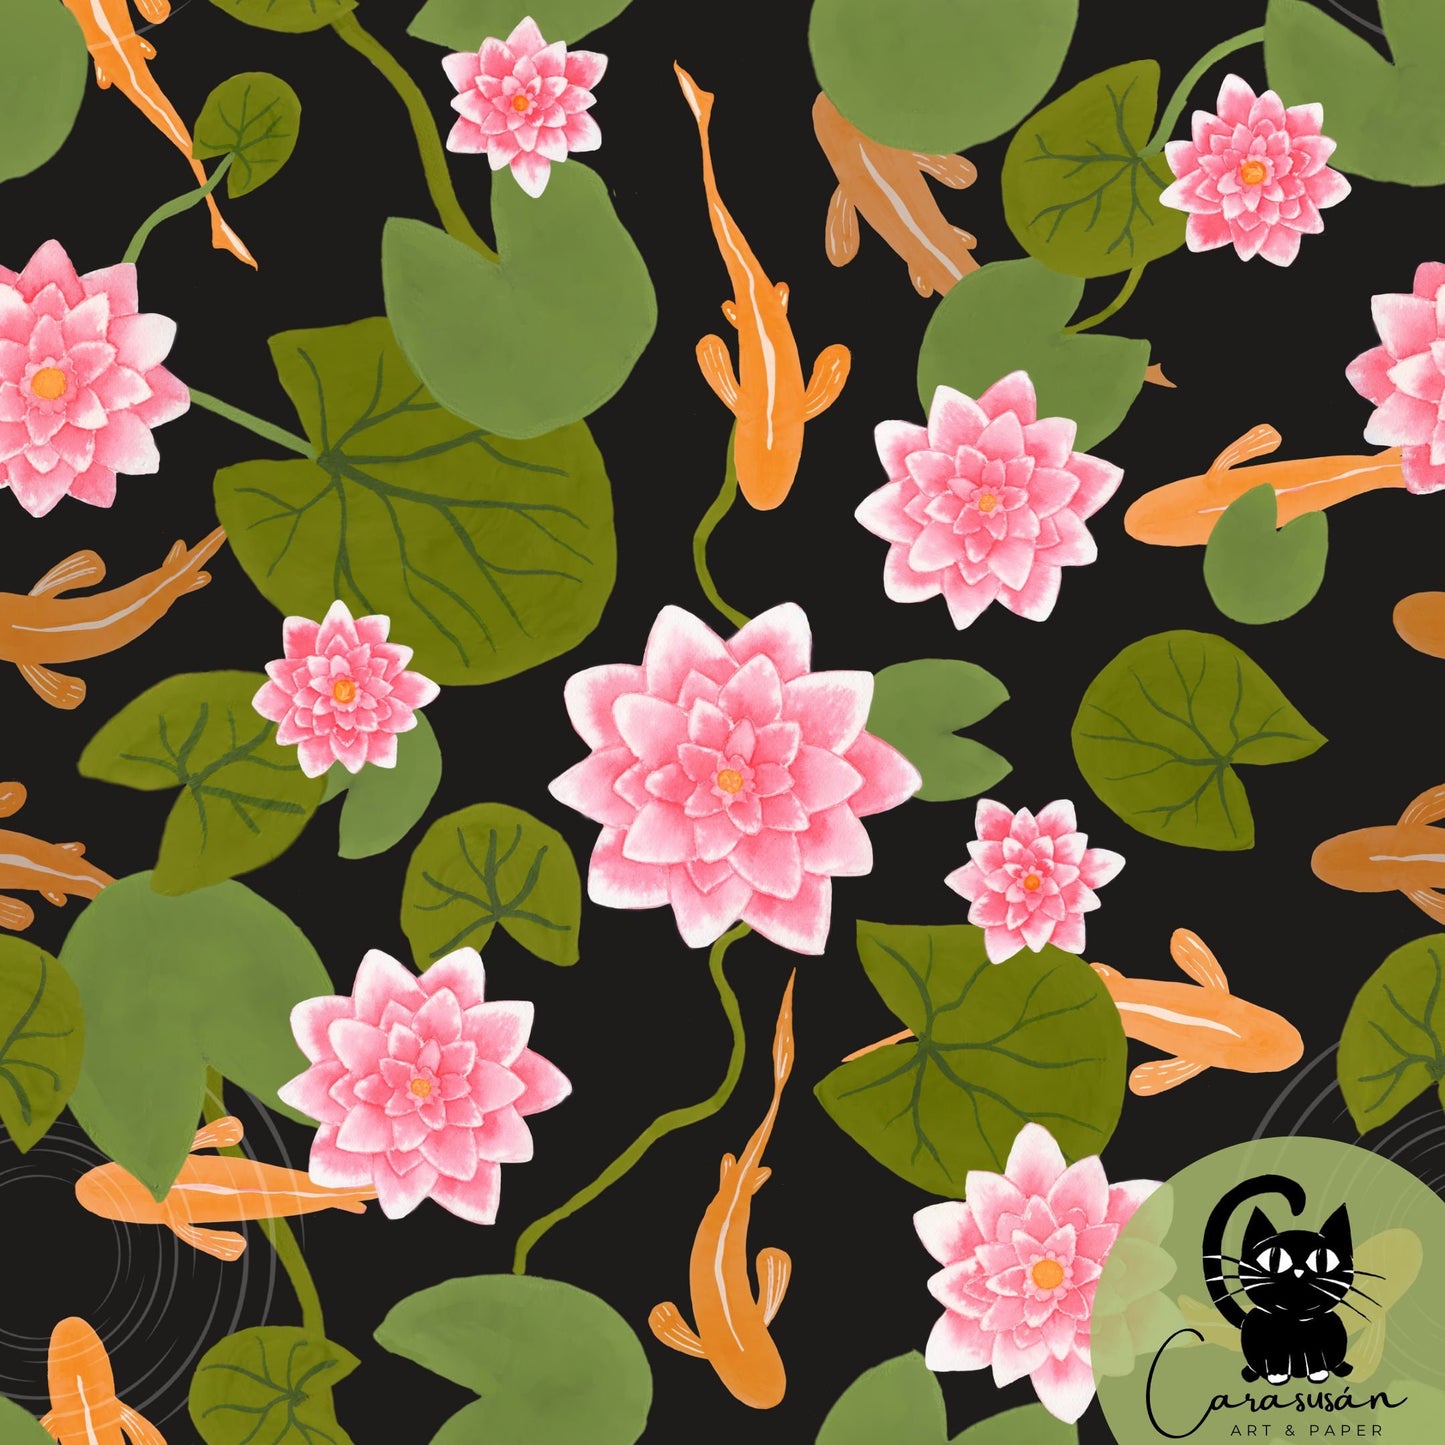 Wrapping paper 'Waterlily' 49x68cm with water lilies and koi